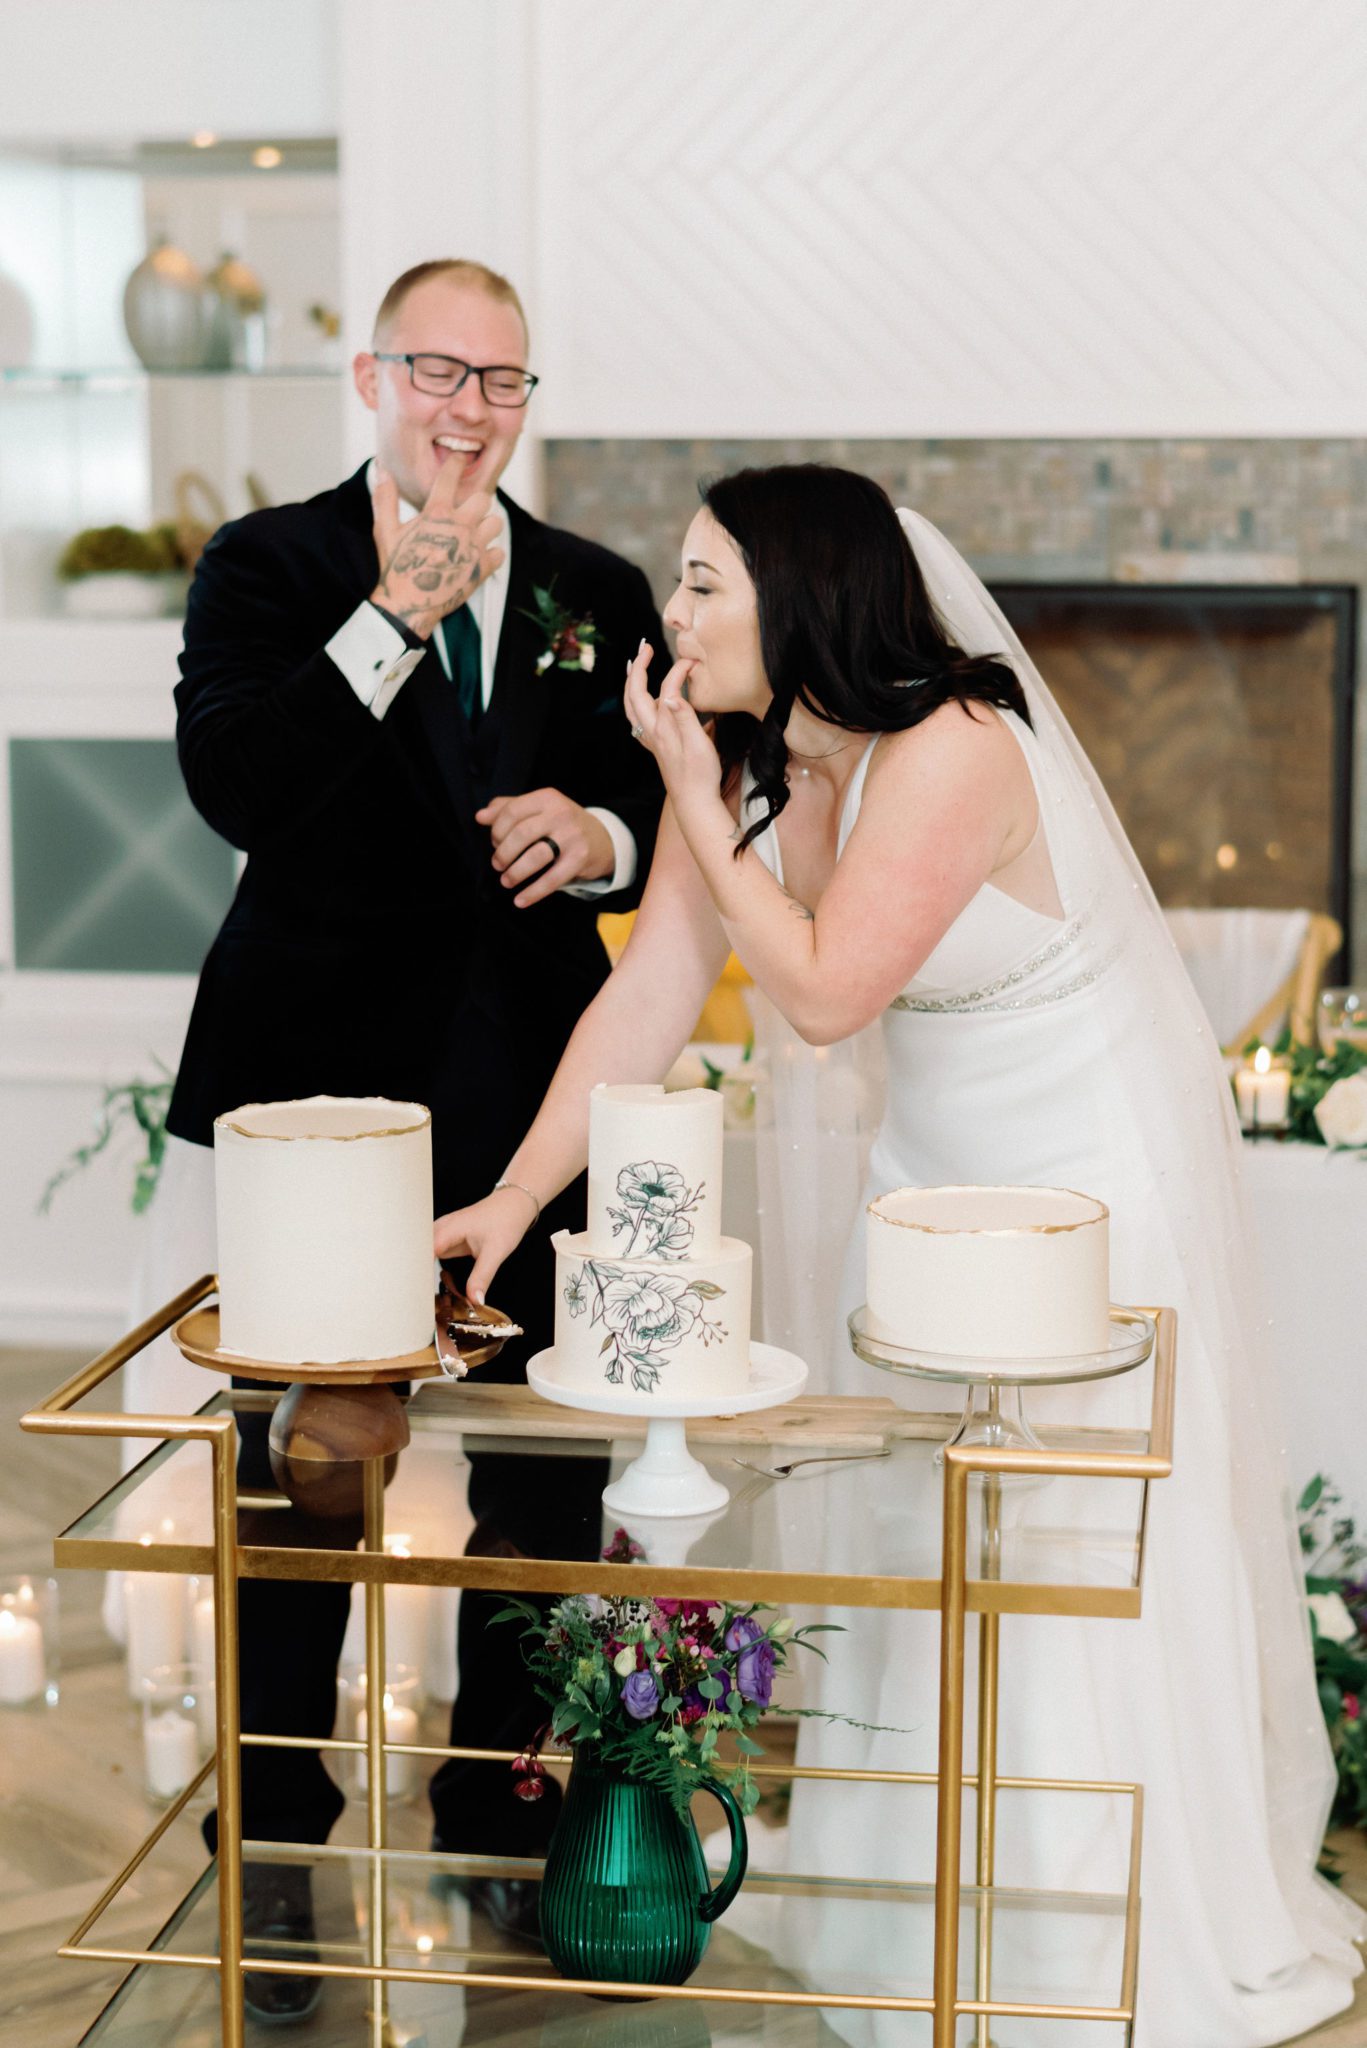 cake cutting, stencilled wedding cake with gold foil, unique wedding cake ideas, wedding cake inspiration